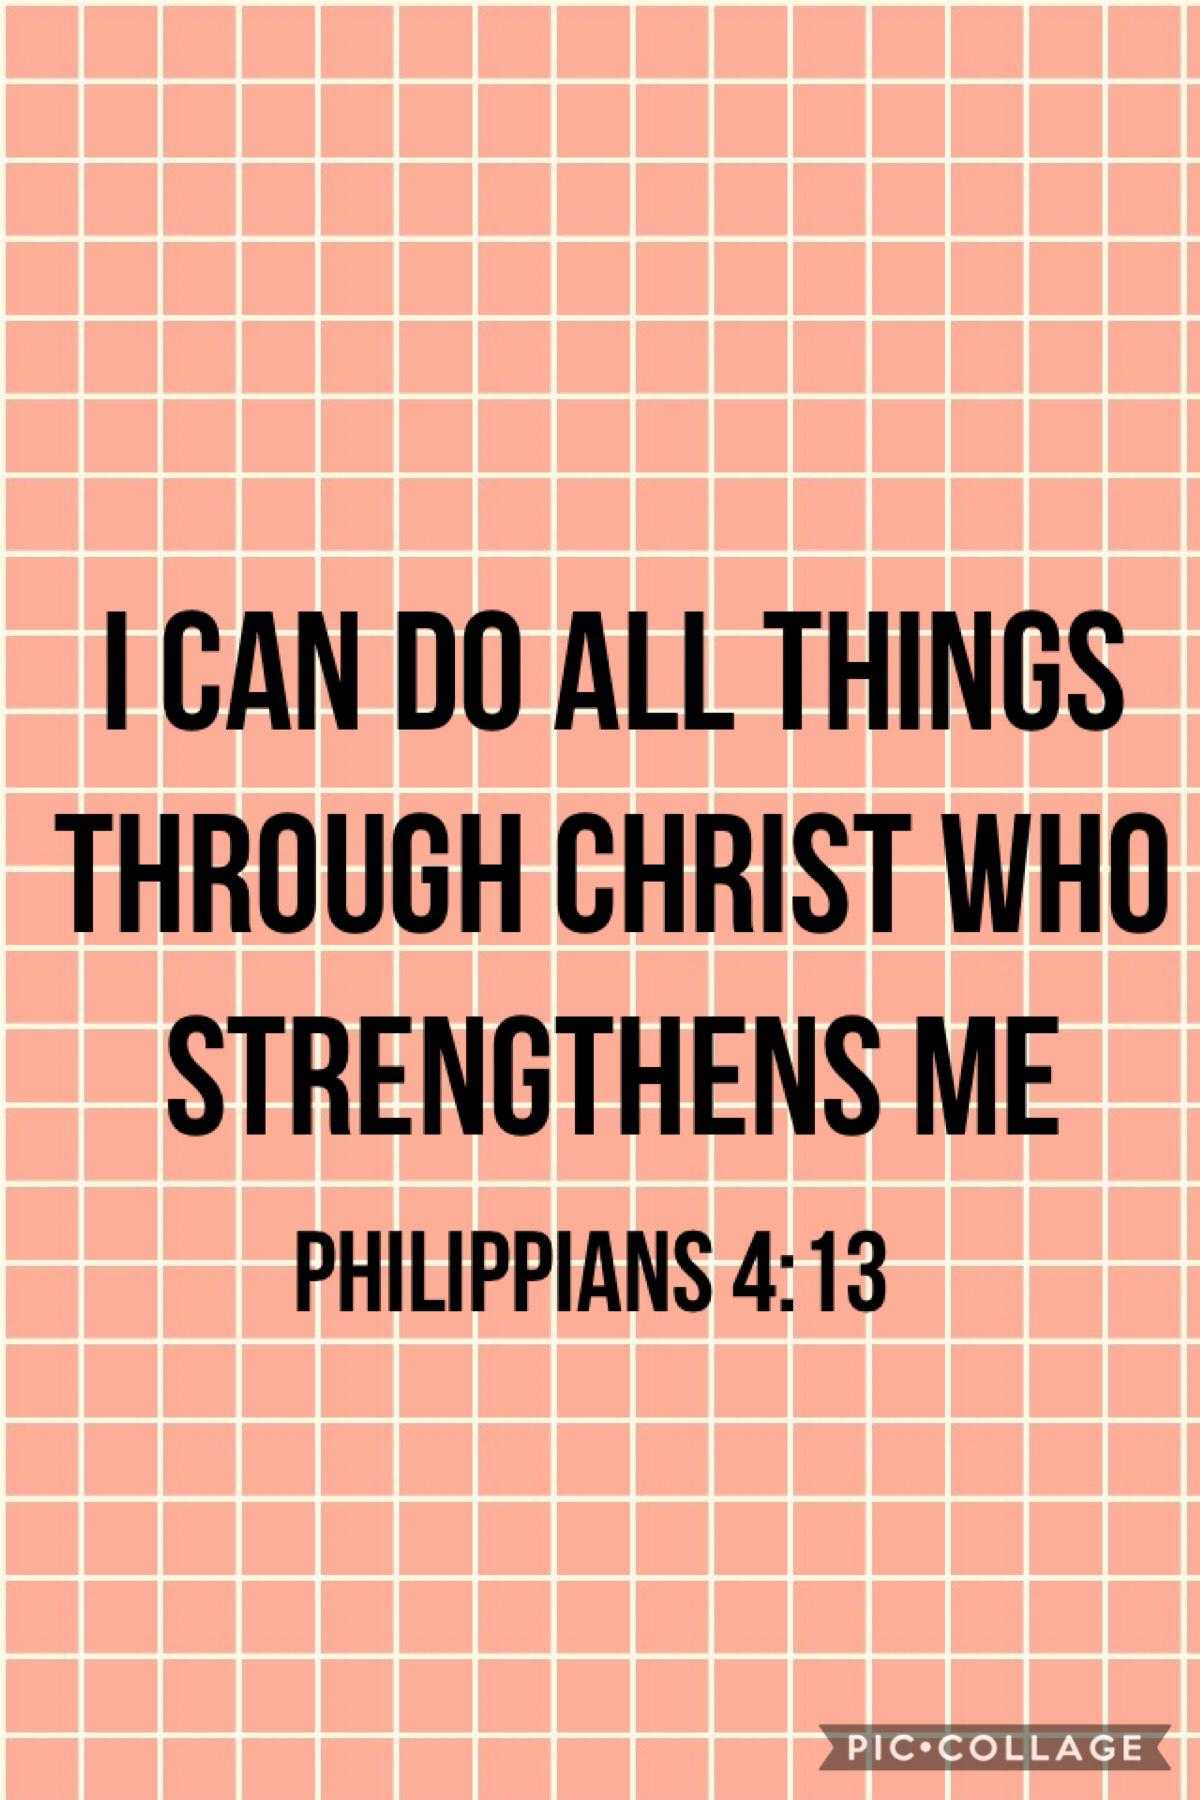 Christ gives you and me strength